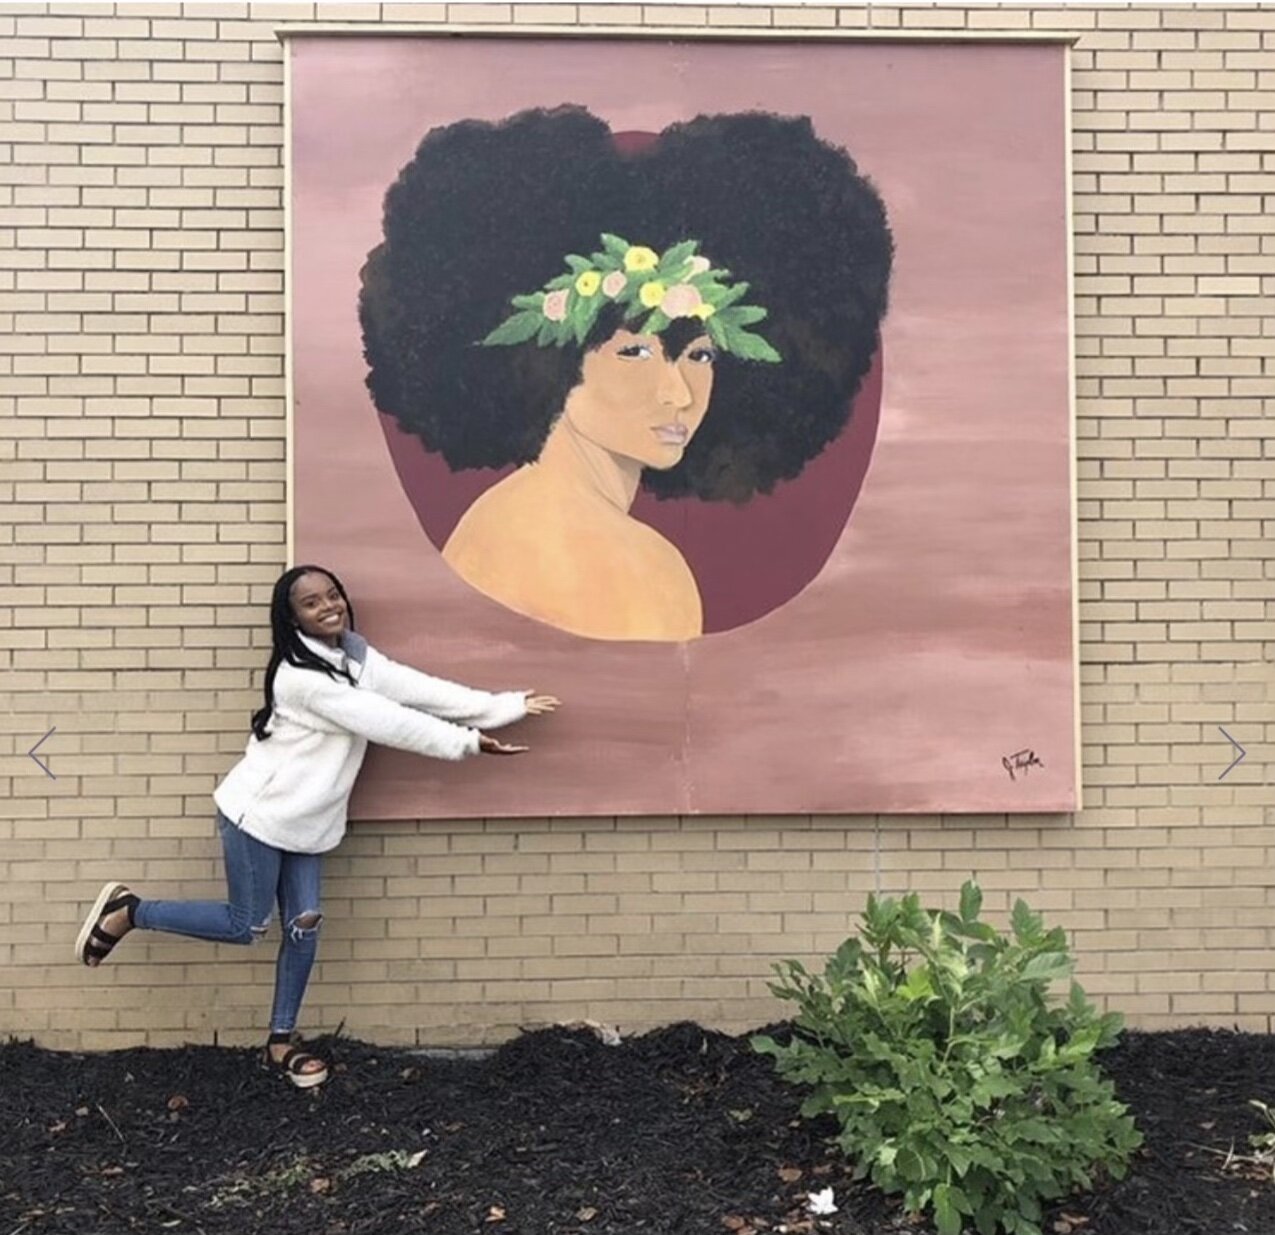 Taylor's first mural in Battle Creek was done in 2019 at the Southwestern Michigan Urban League offices. She has done 20 murals throughout Michigan since starting her business.